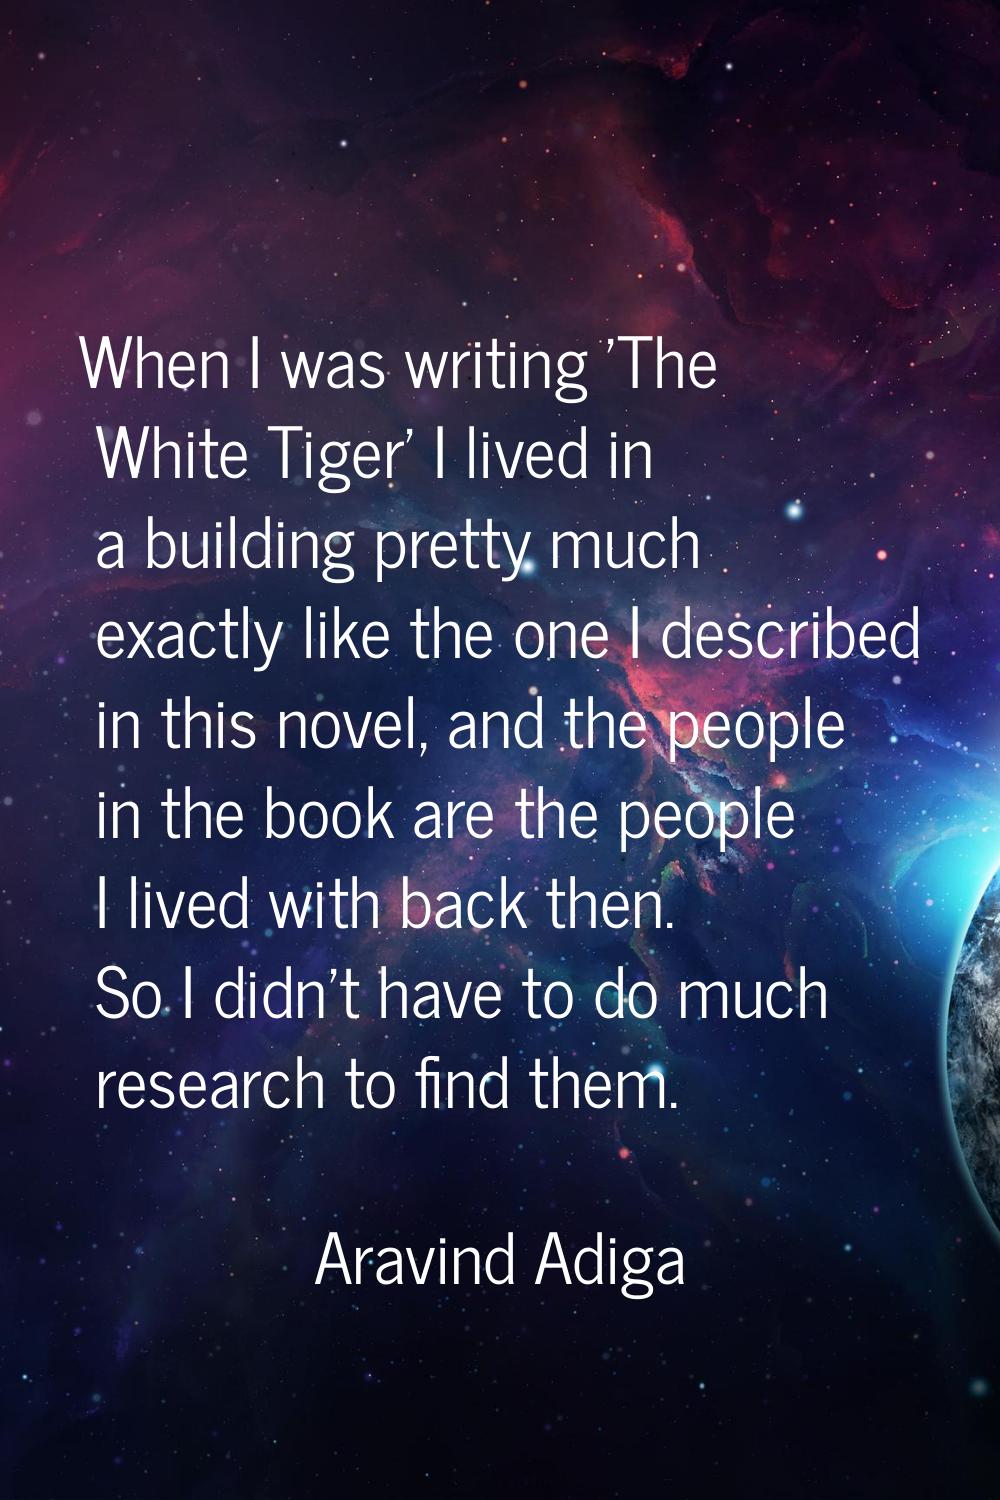 When I was writing 'The White Tiger' I lived in a building pretty much exactly like the one I descr